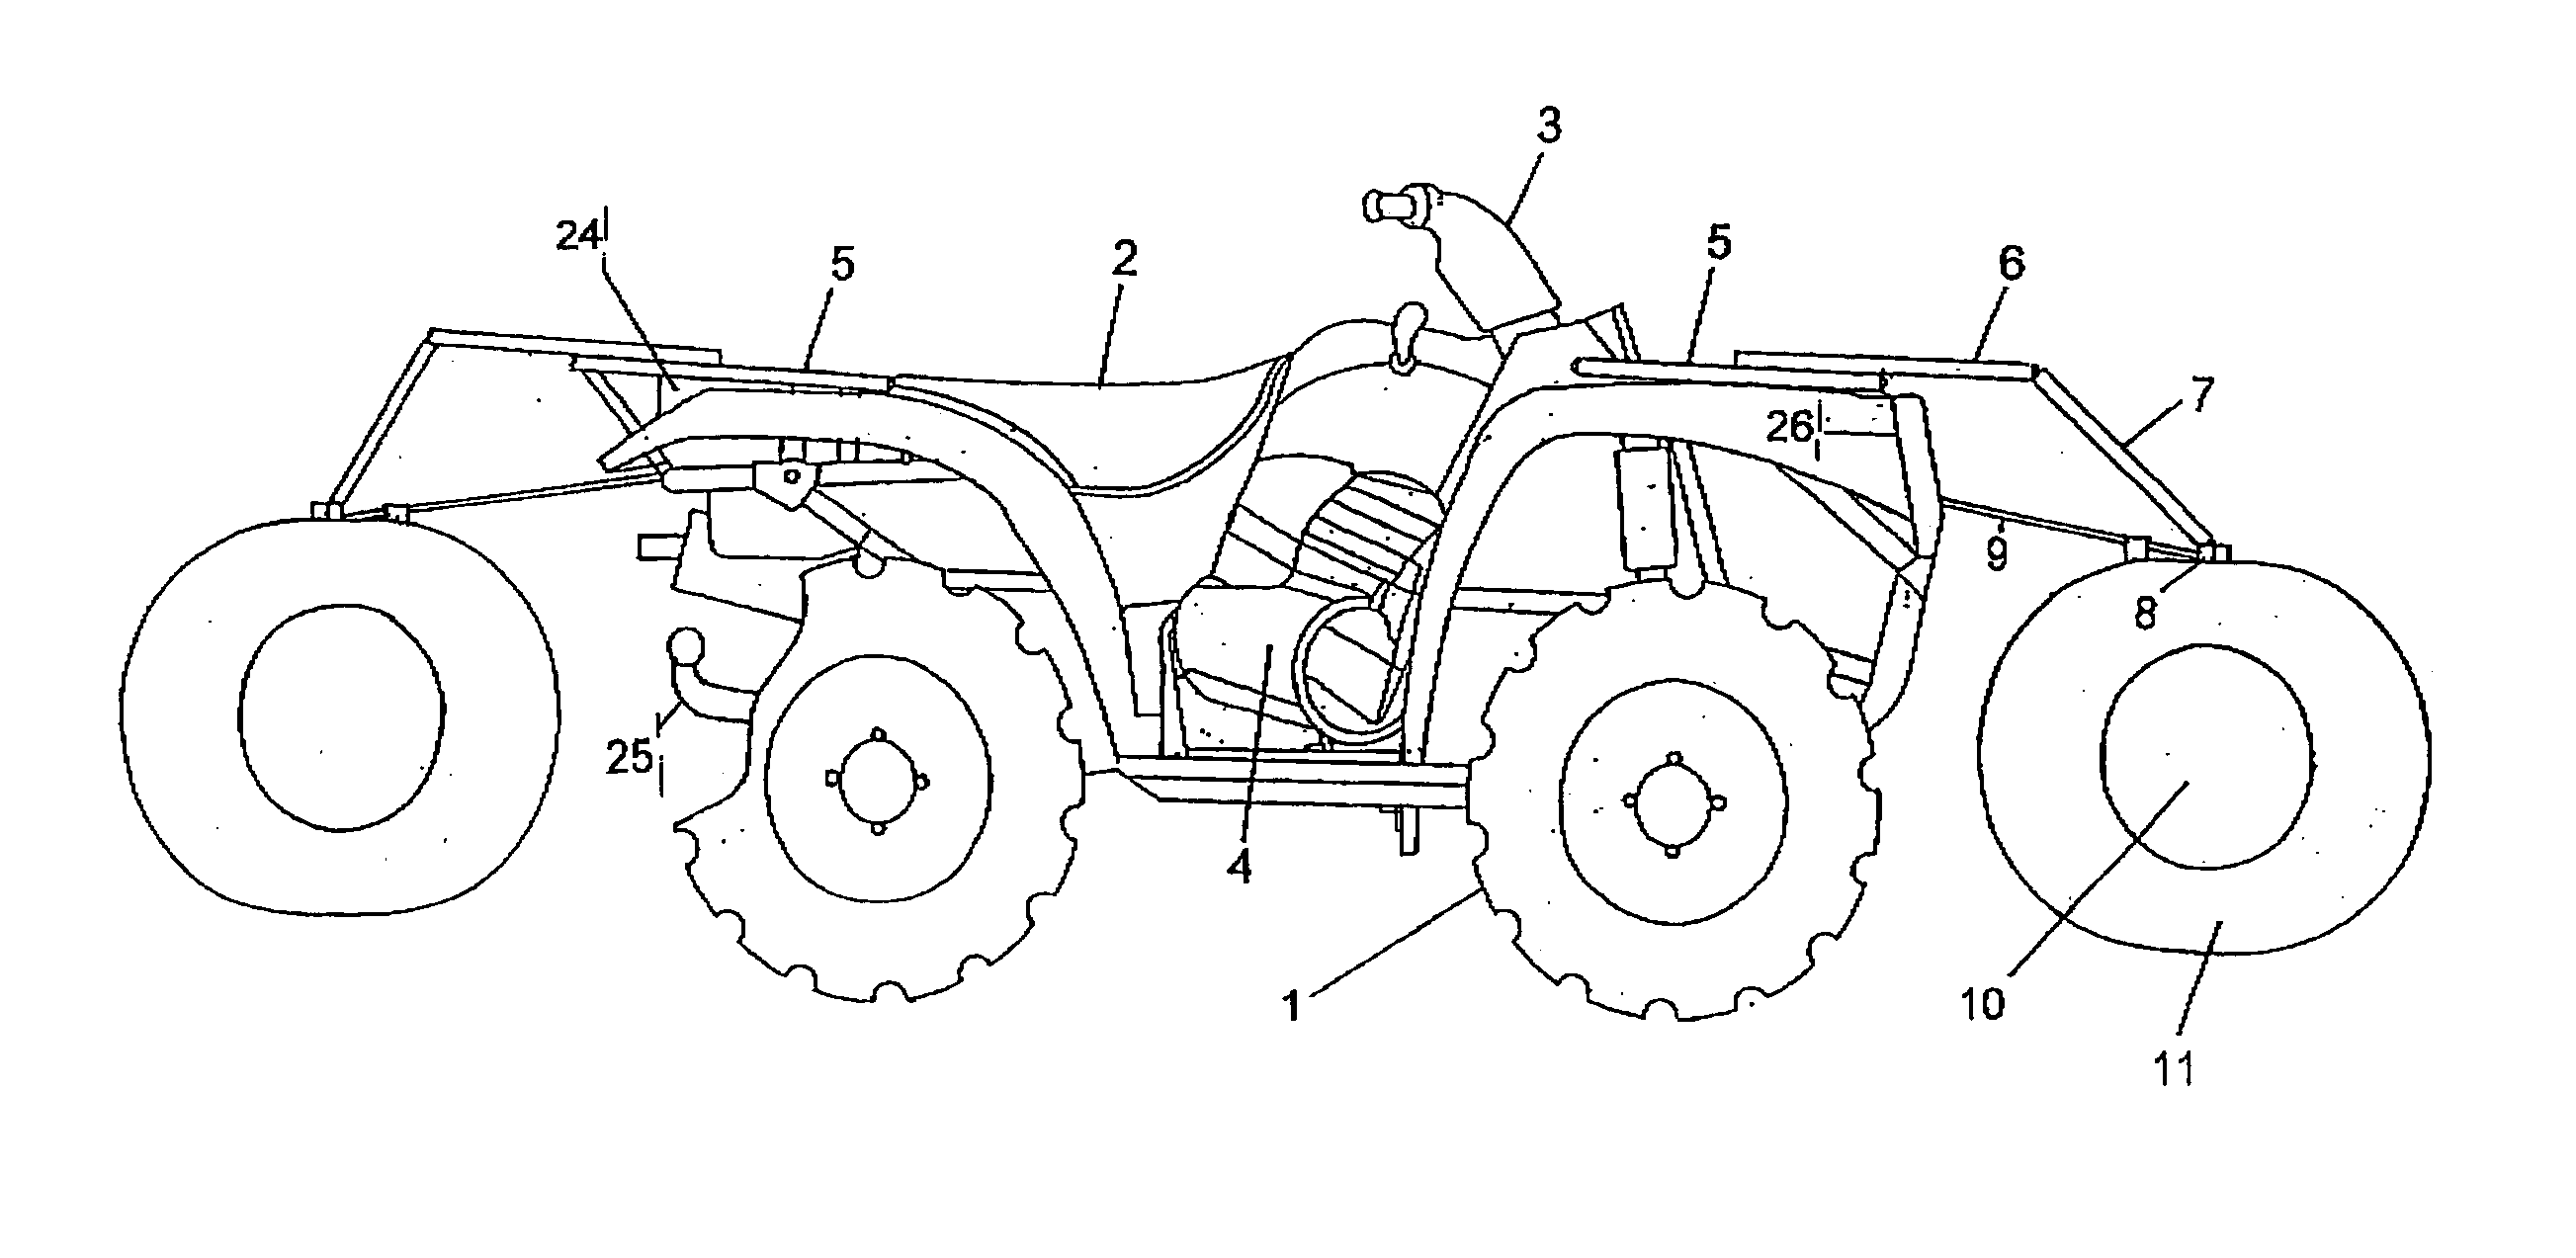 Conversion kit for all terrain vehicle